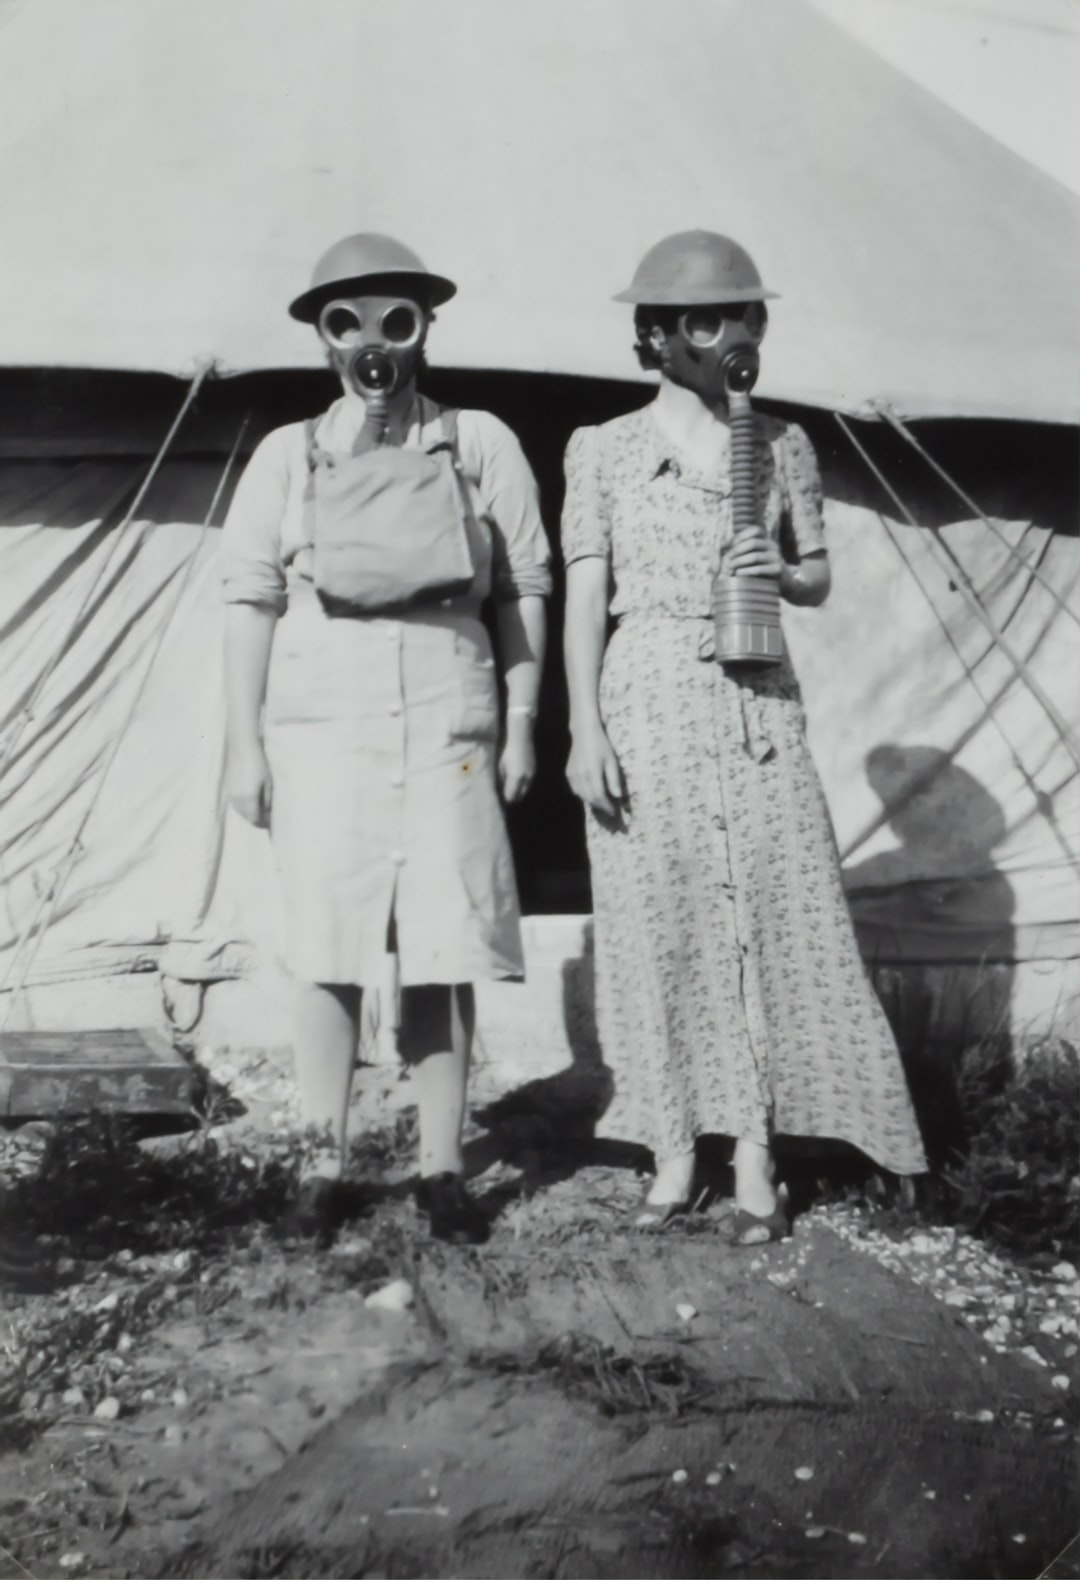 Nell Duncanson and Isabel Plante Wearing Gas Masks, Israel, World War II, 1939-1943